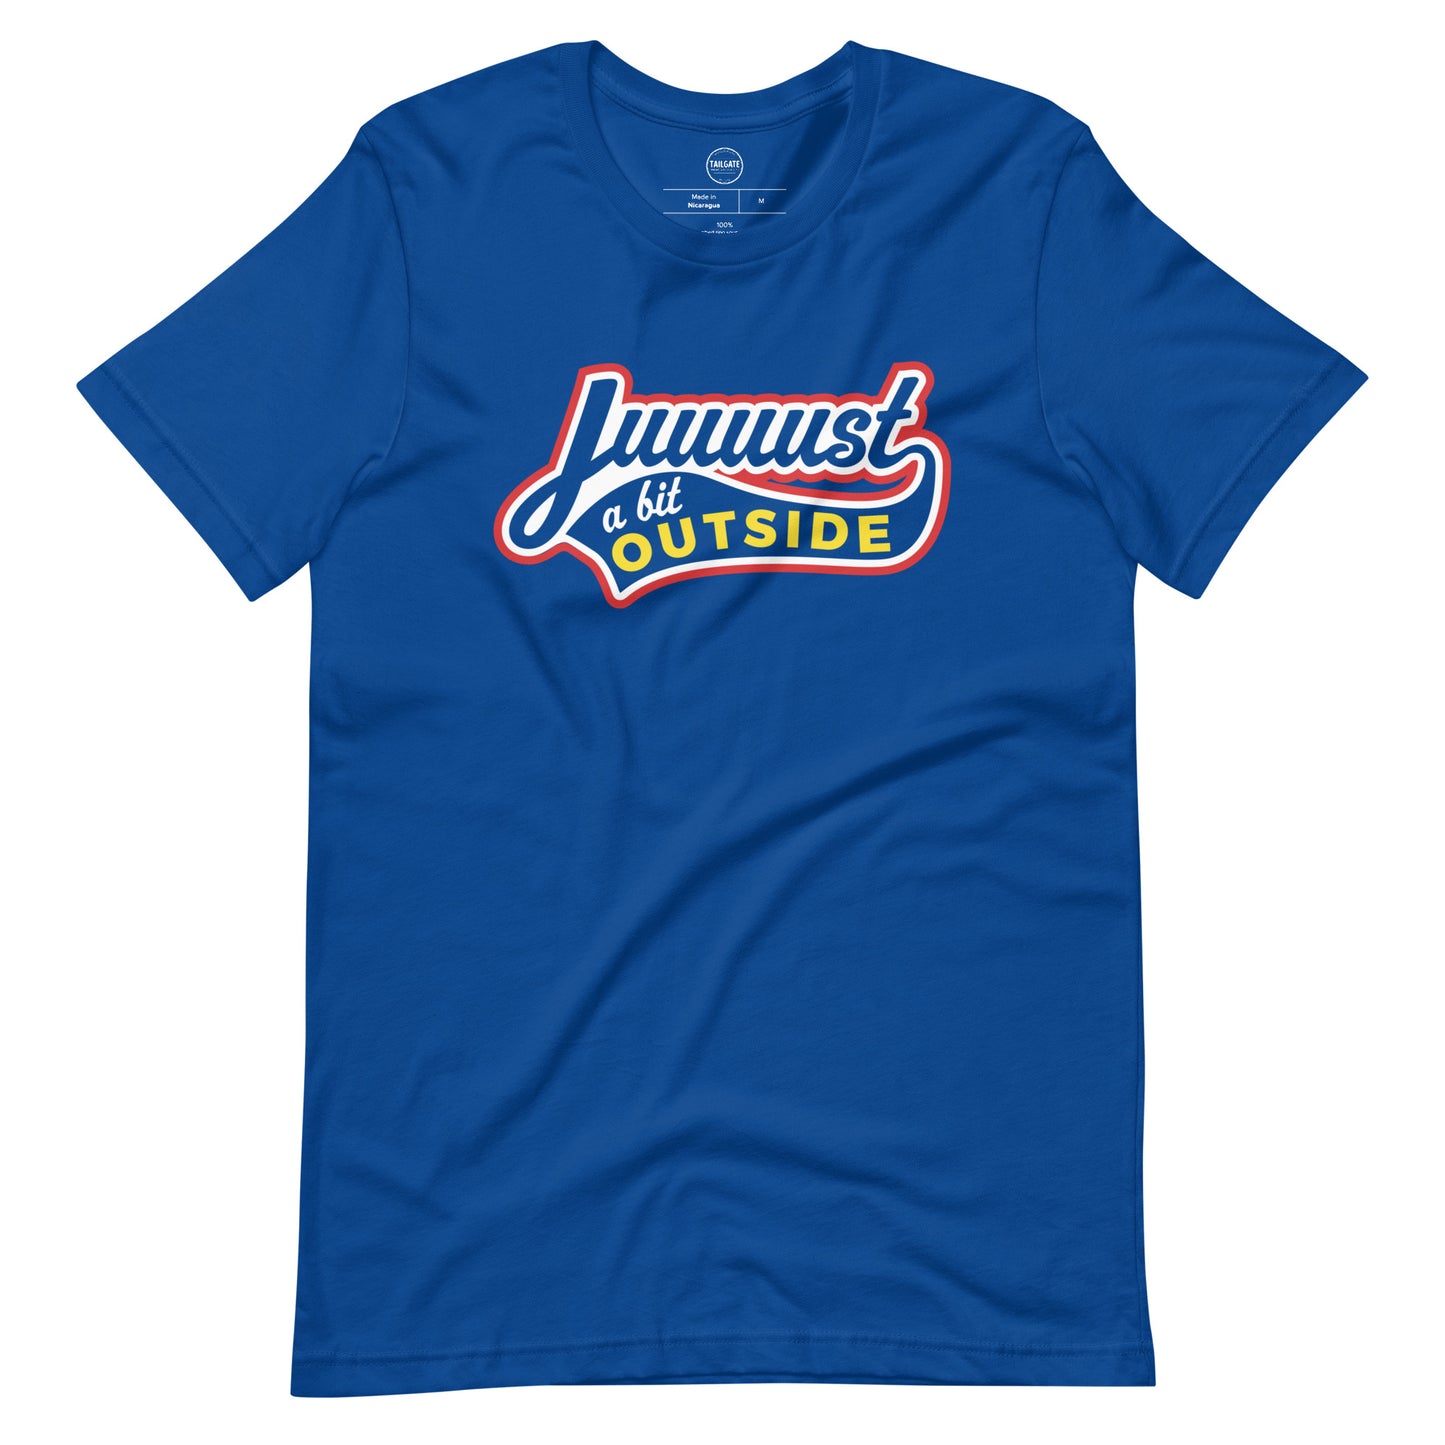 Image of royal blue t-shirt with design of "Juuuust a bit Outside" in white/red/yellow located on centre chest. Just a Bit Outside is an homage to the great baseball movie "Major League". This design is exclusive to Tailgate Mercantile and available only online.